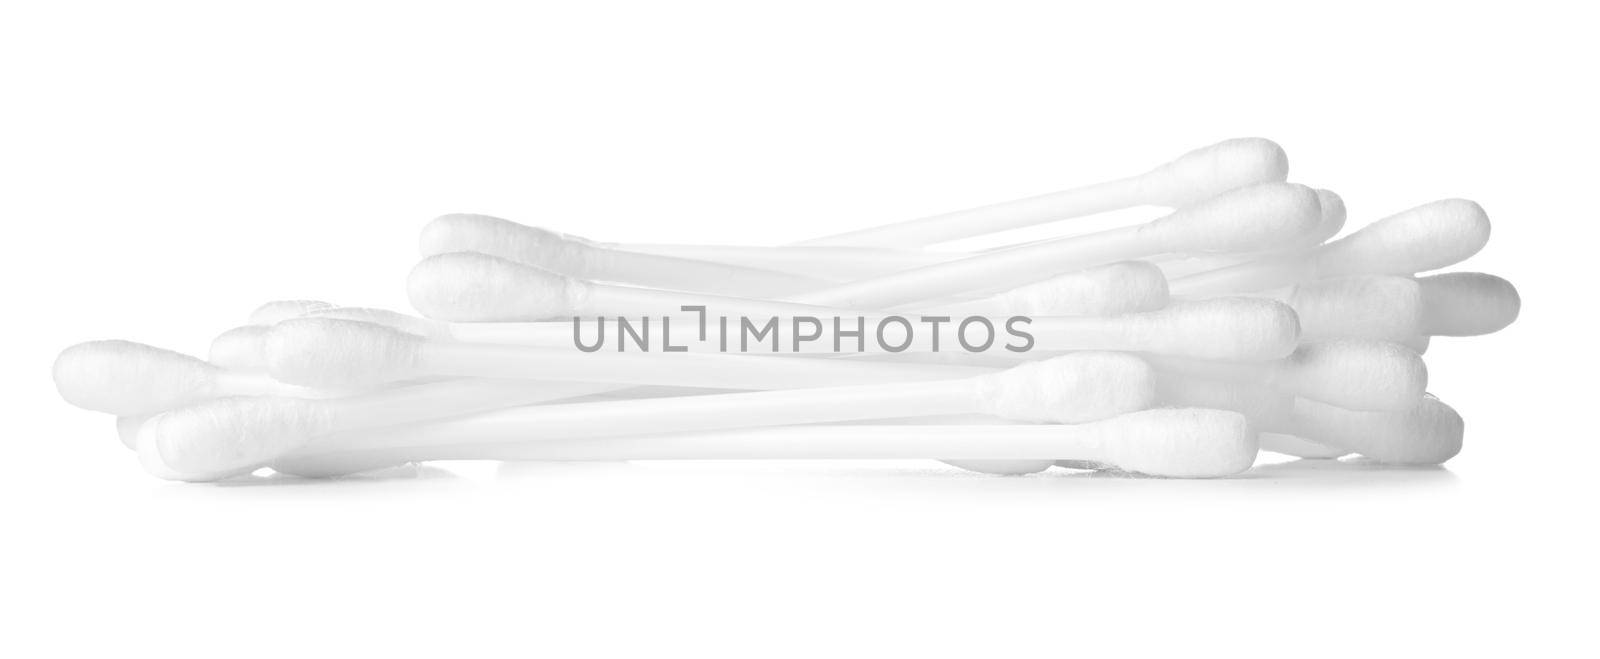 Cotton ear buds isolated on white background close up